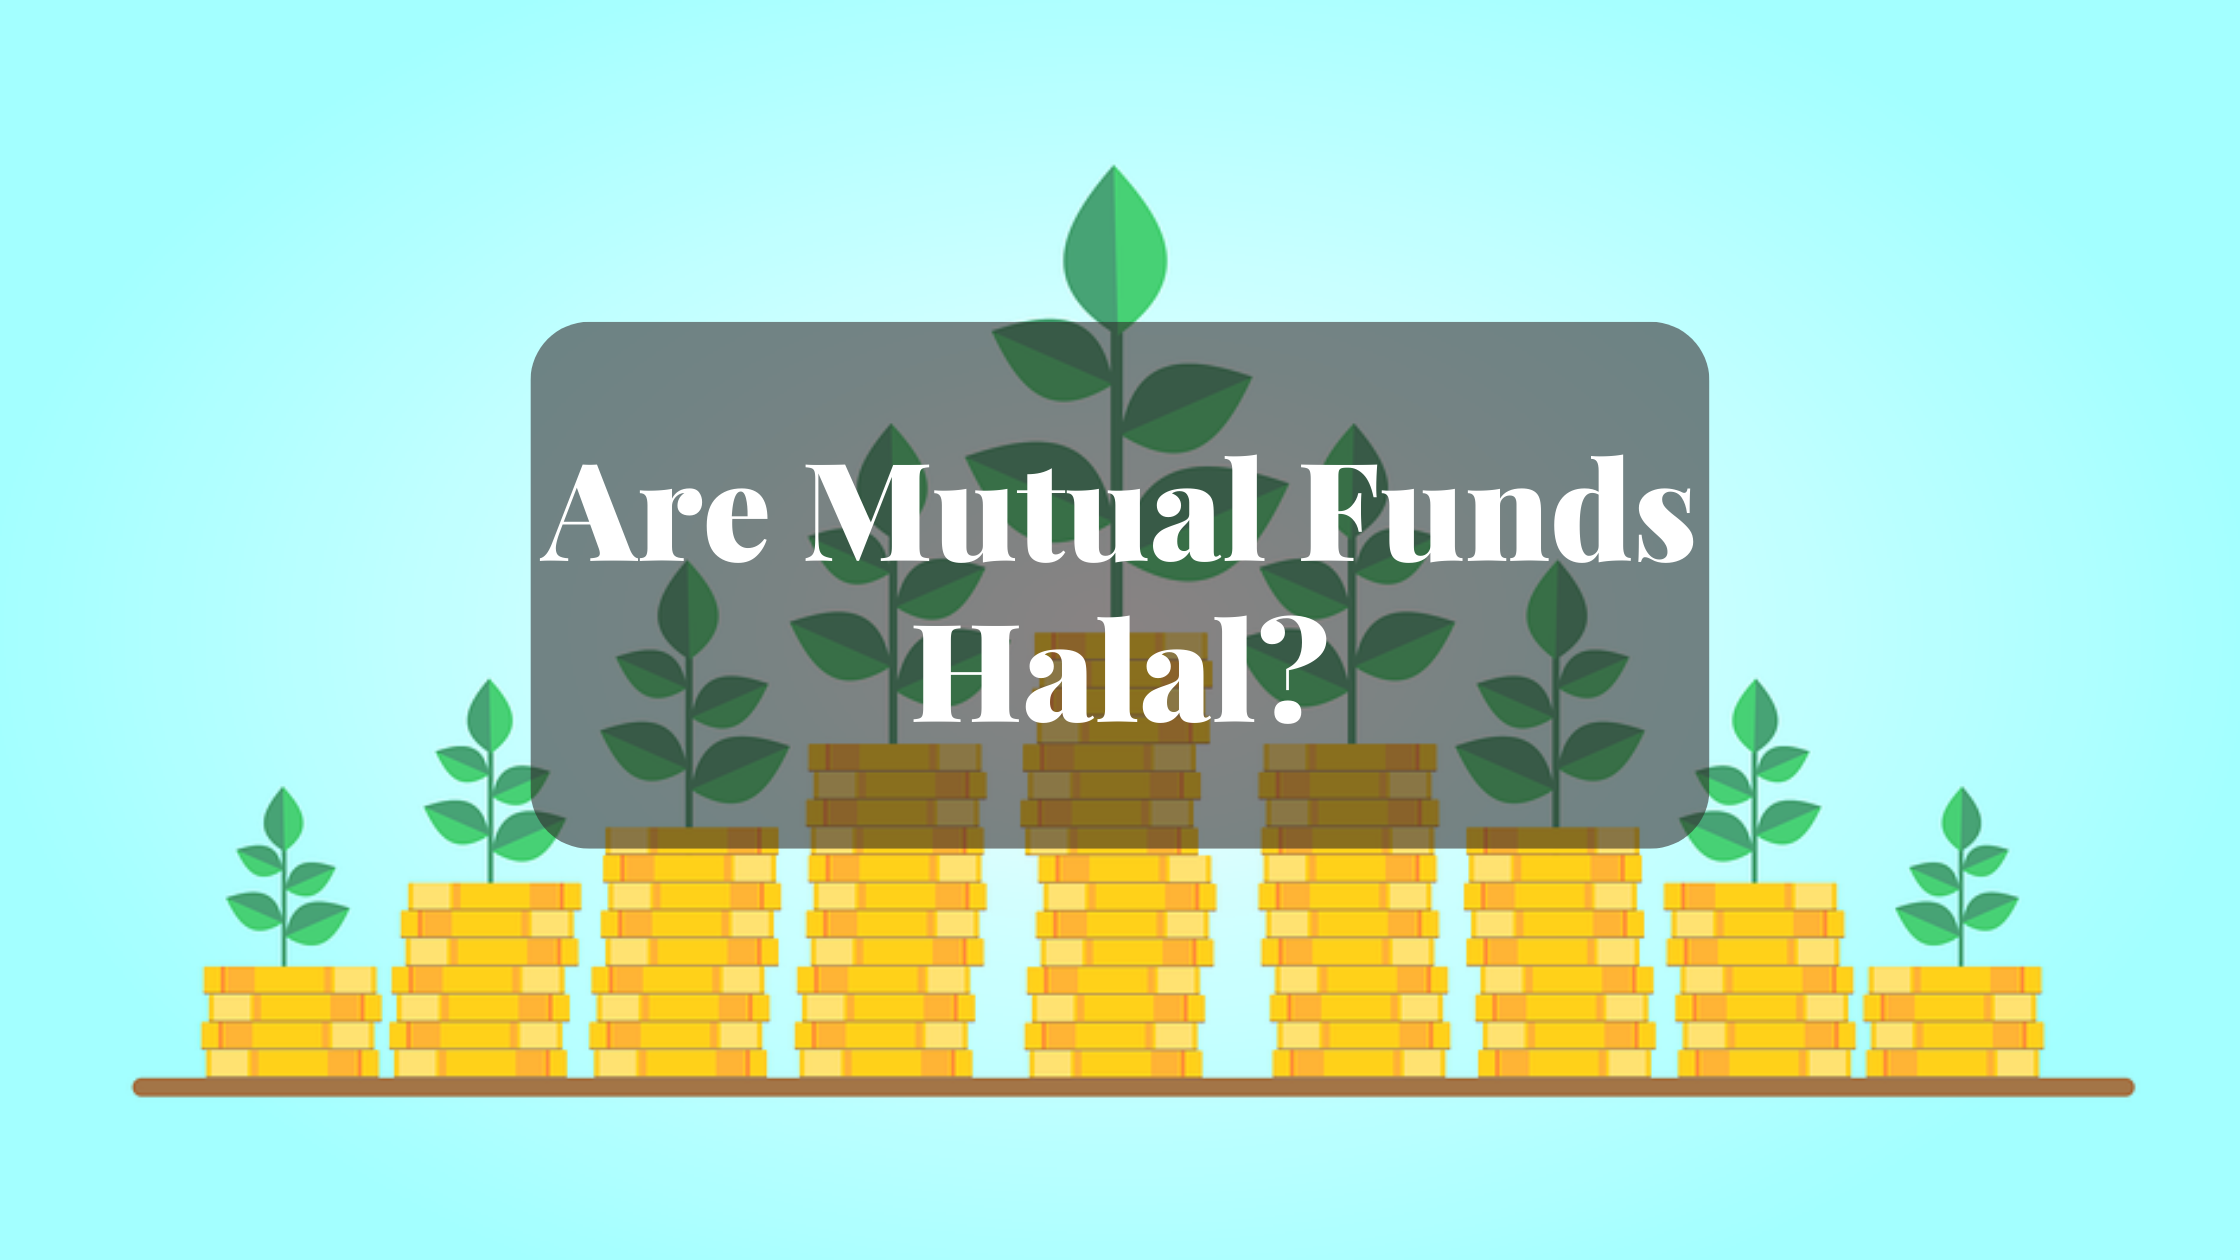 Are Mutual Funds Halal